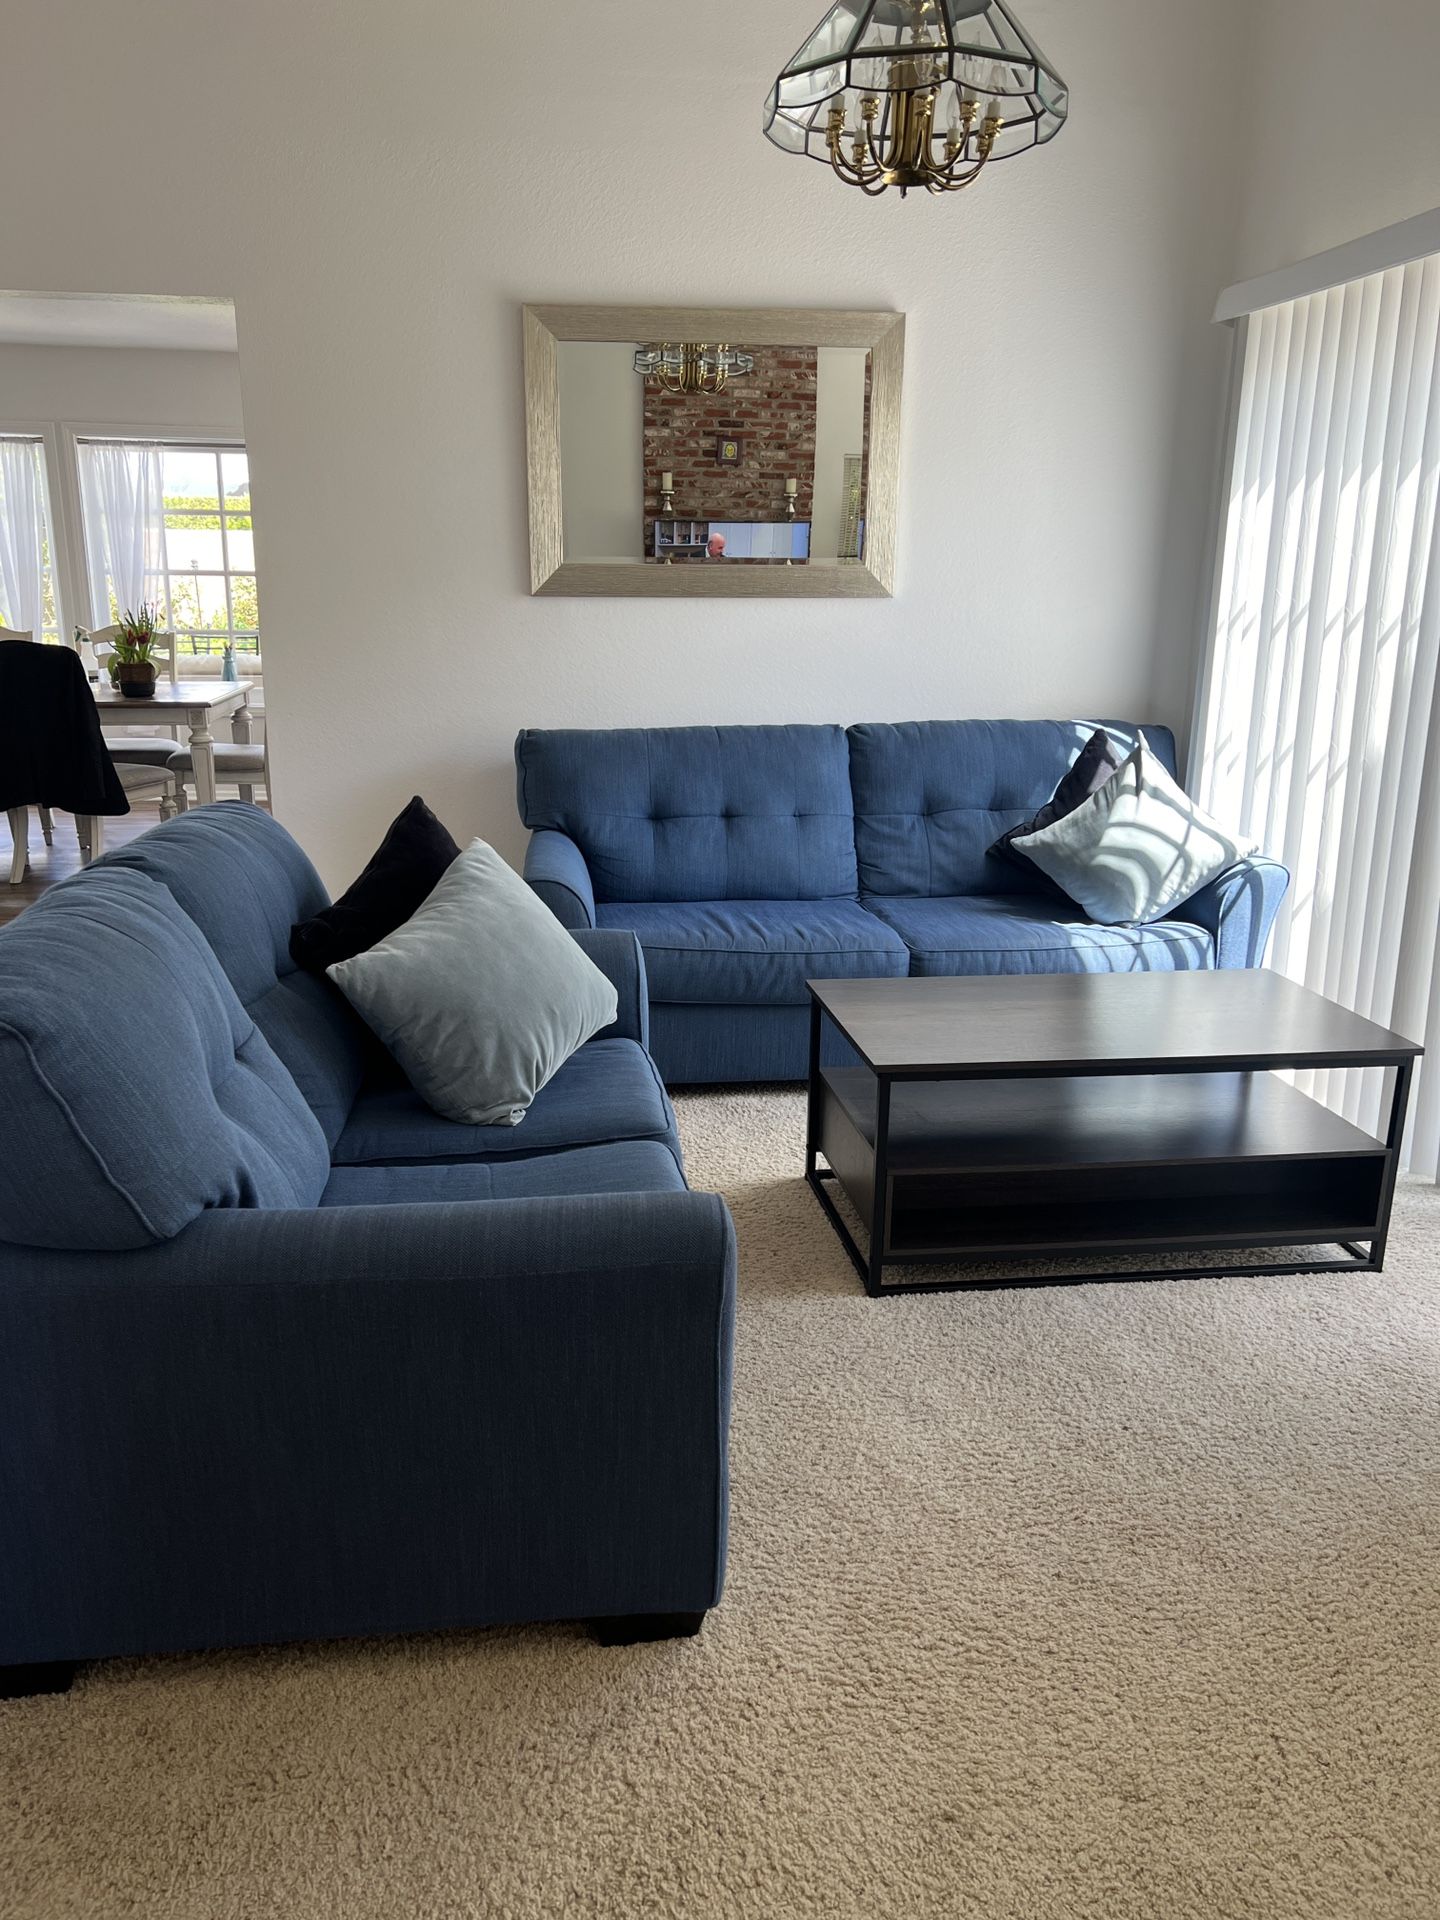 Two Blue Sofas With 4 Cushions